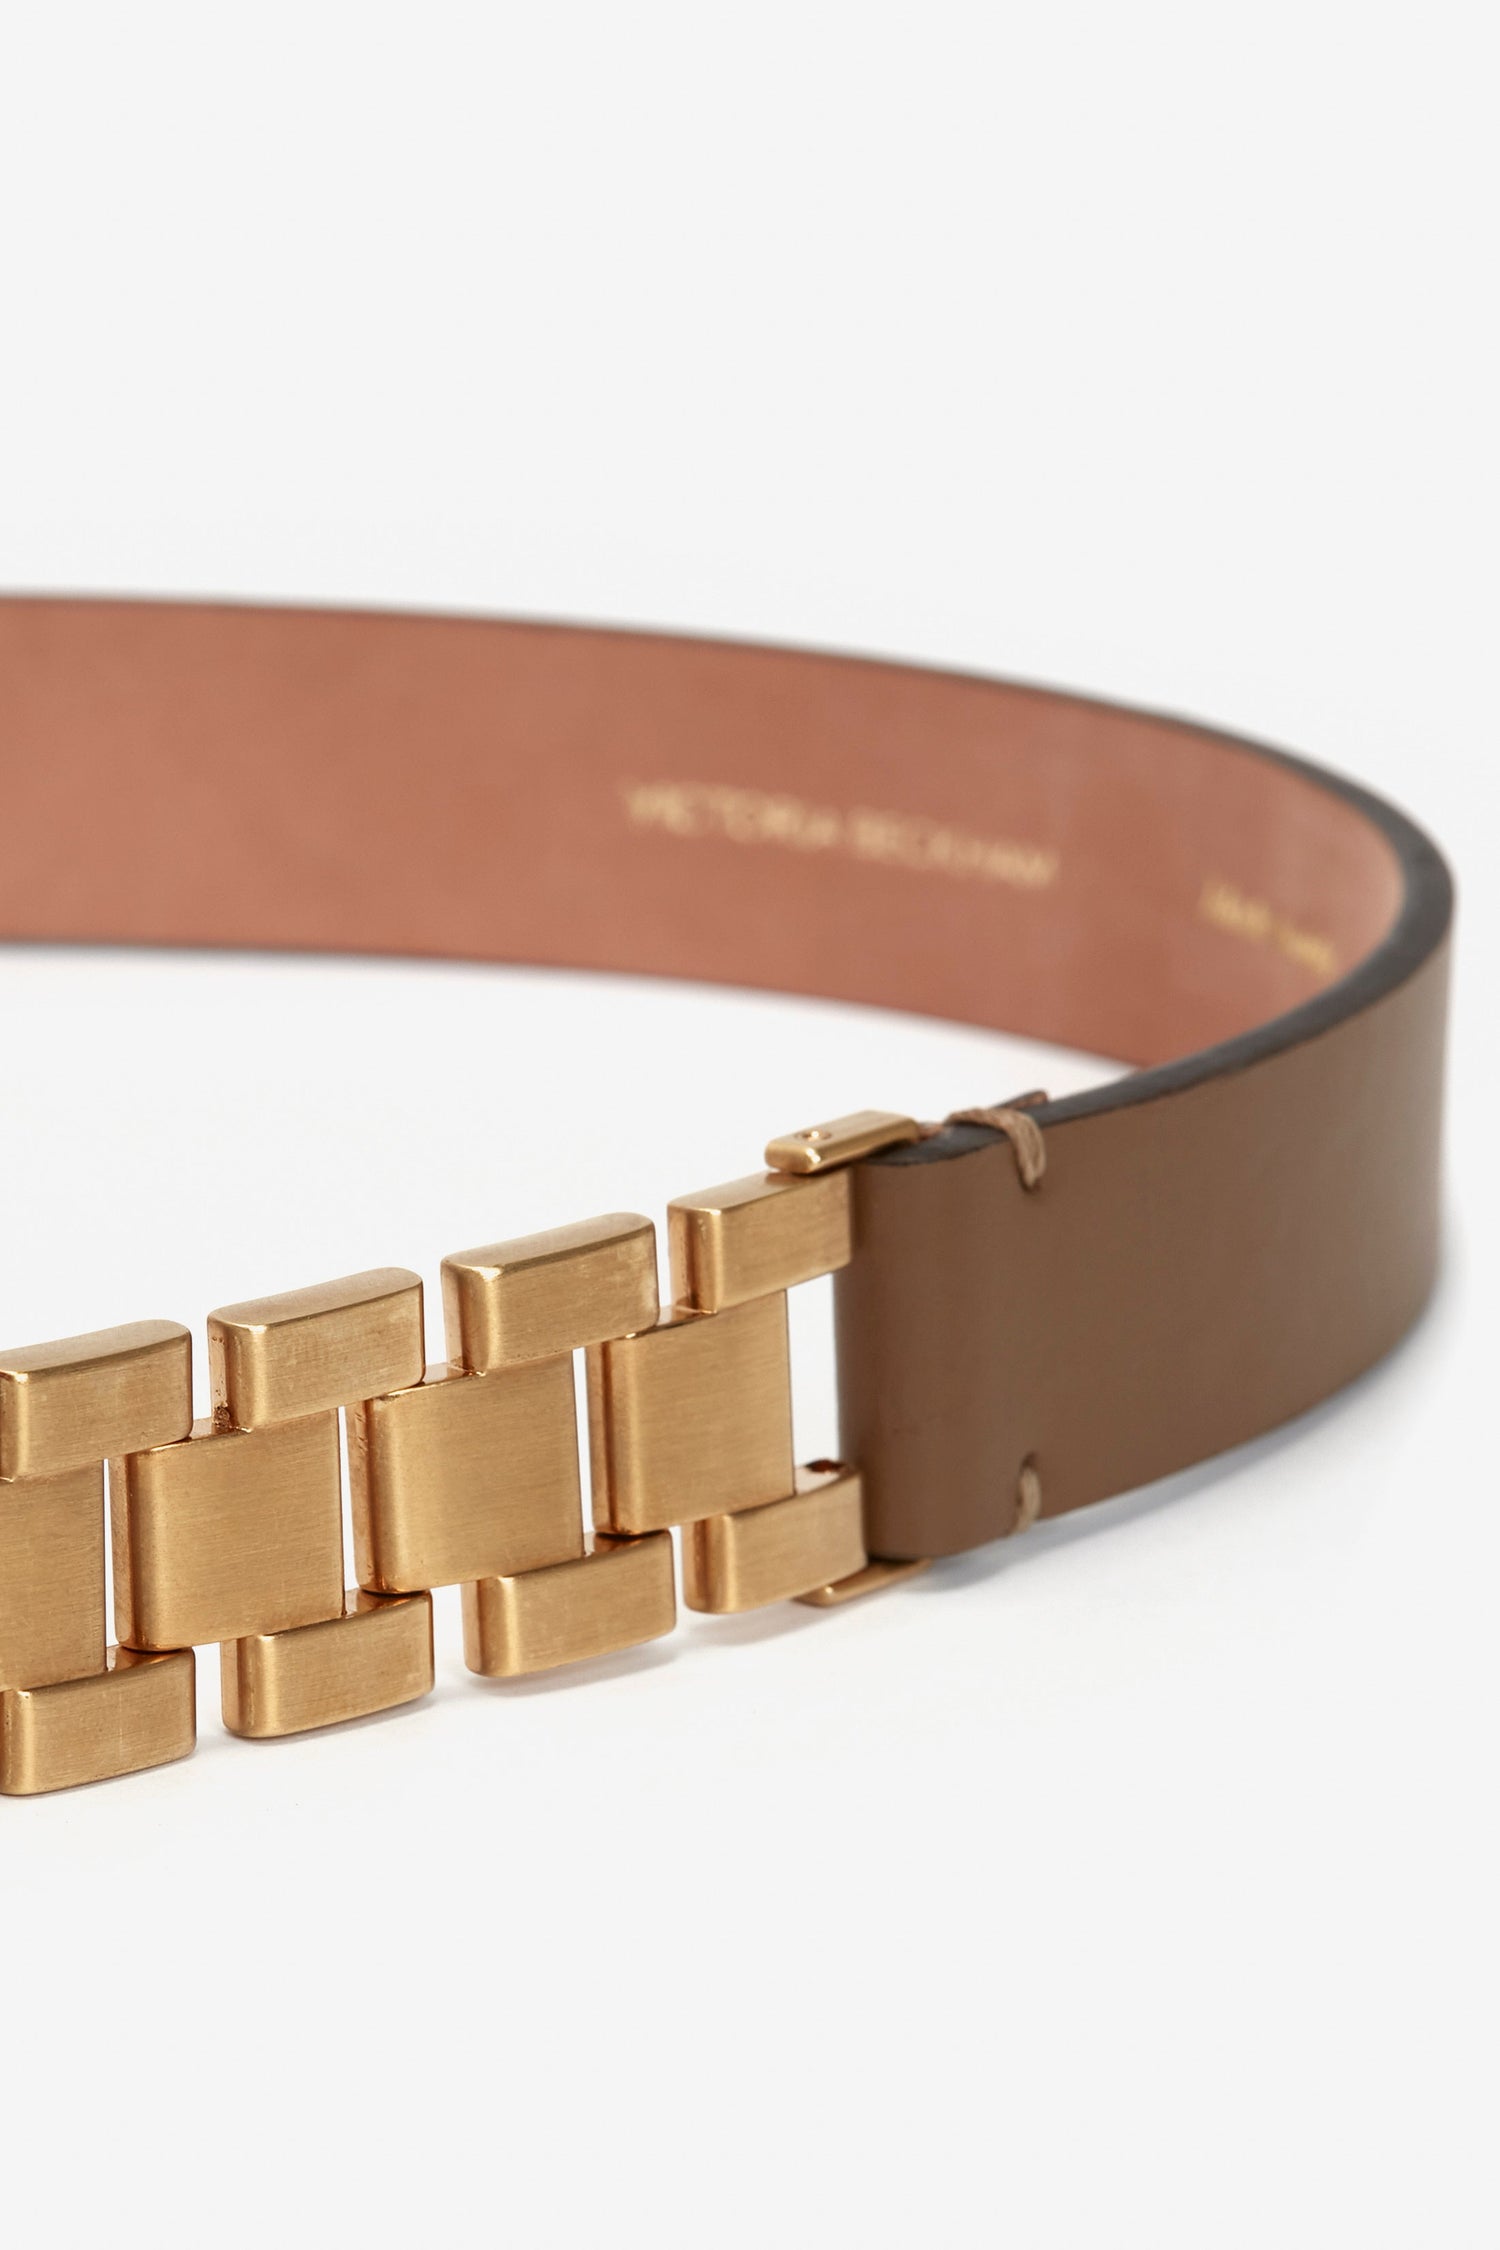 Watch Strap Detail Belt in Khaki-Brown by Victoria Beckham with a unique gold-toned brick-like buckle, set against a white background.